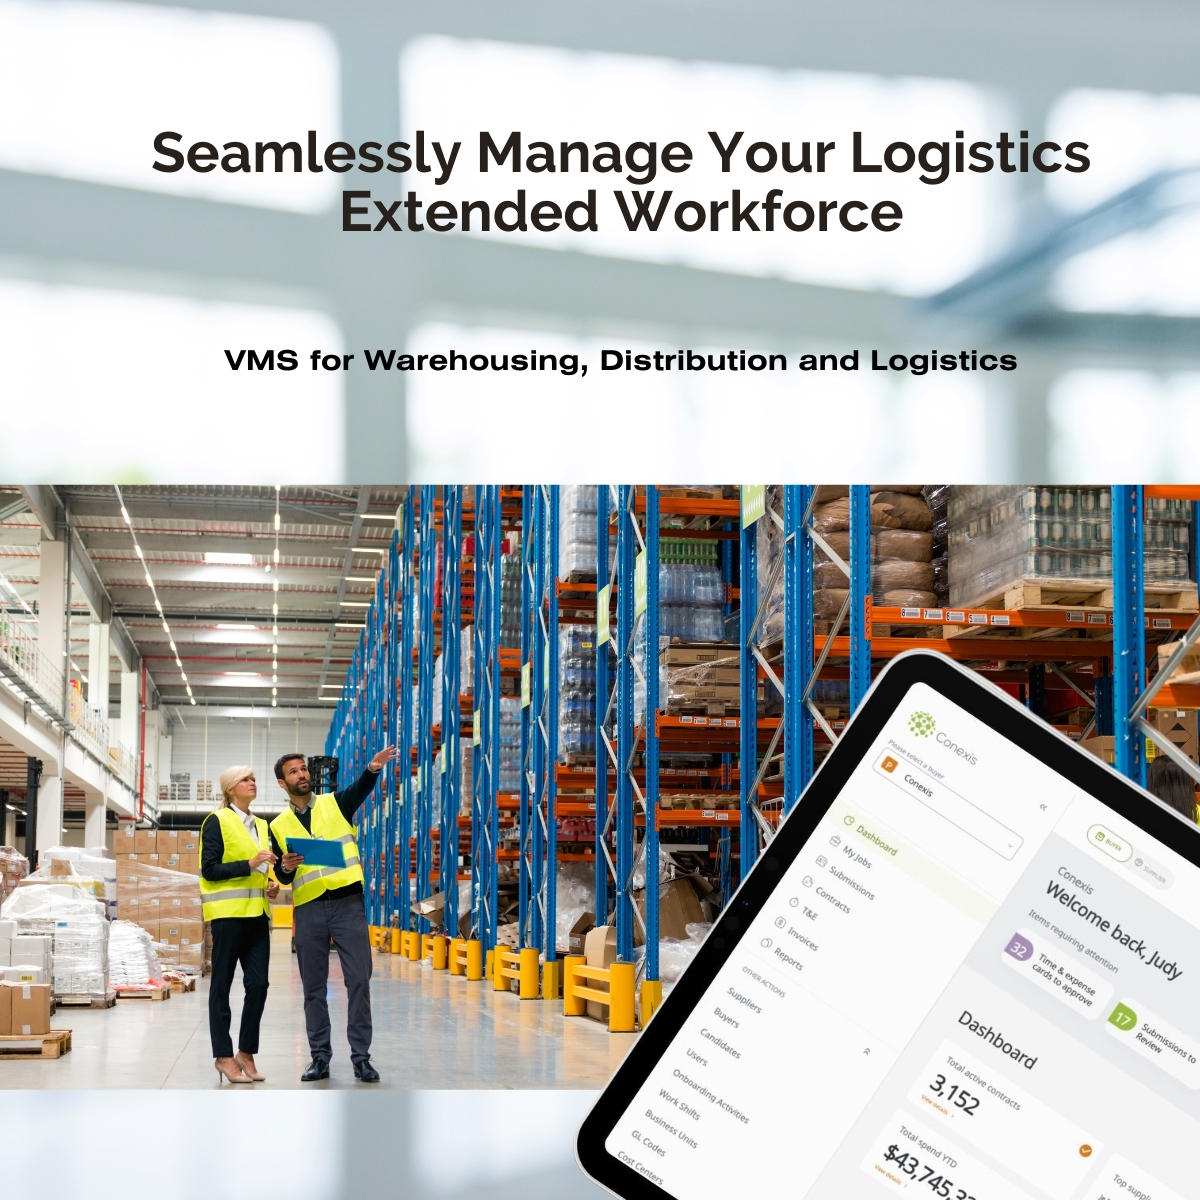 Tired of dealing with no shows and high turnover in your logistics operations? Conexis offers the visibility and control you need over your extended workforce, reducing no shows and turnover by over 50% #LogisticsSolutions #Warehousing 
Find out more ⤵️
hubs.ly/Q02v6L8d0